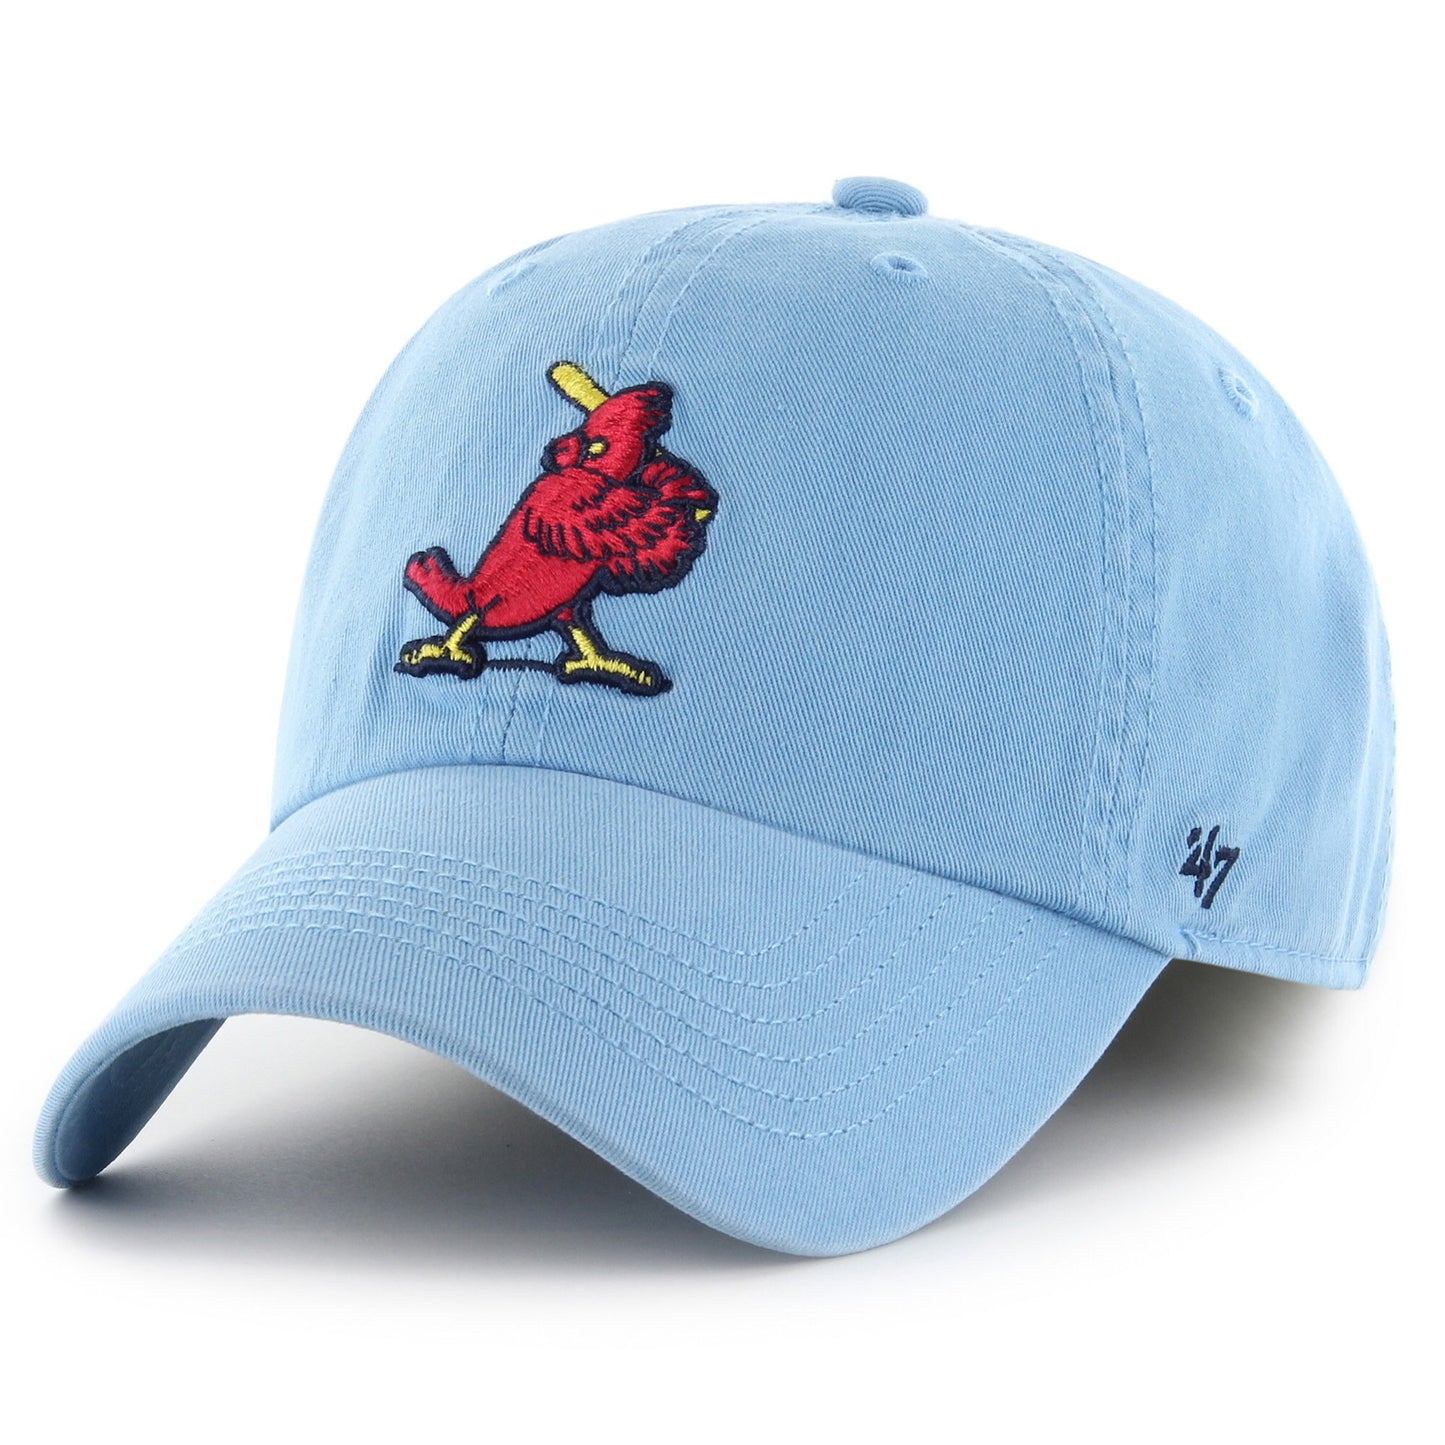 St. Louis Cardinals '47 Cooperstown Collection Franchise Fitted Hat - Light Blue